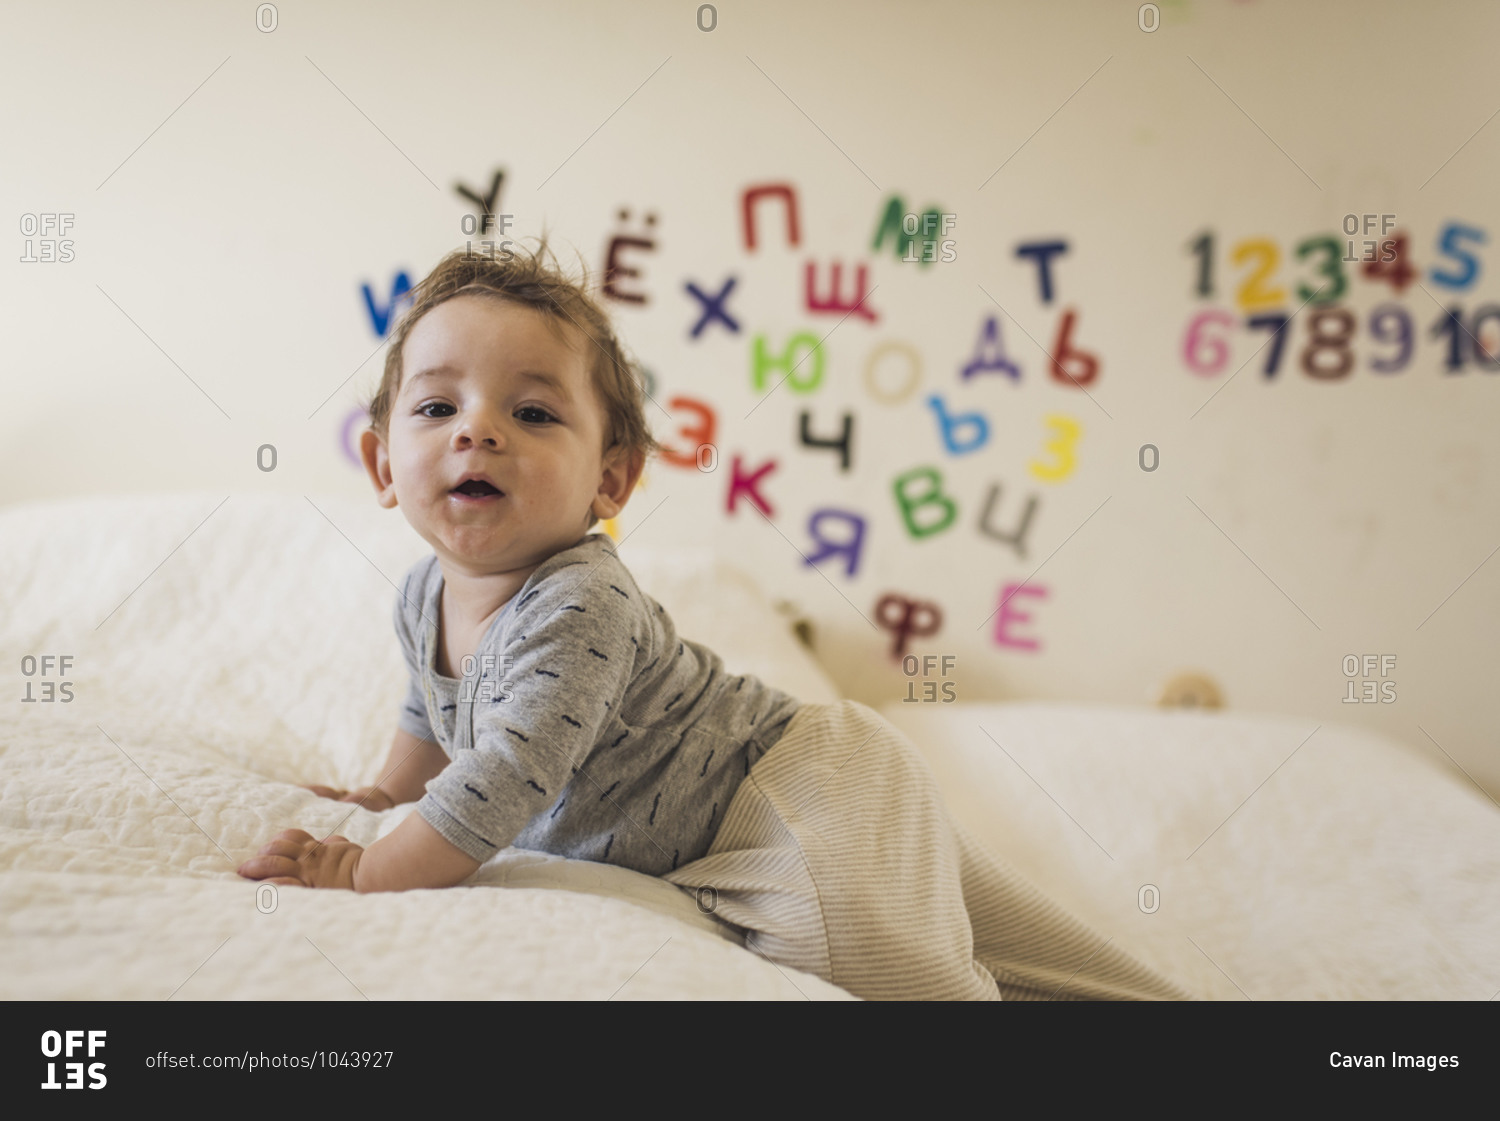 Baby crawling on white bedspread with letters and numbers on wall